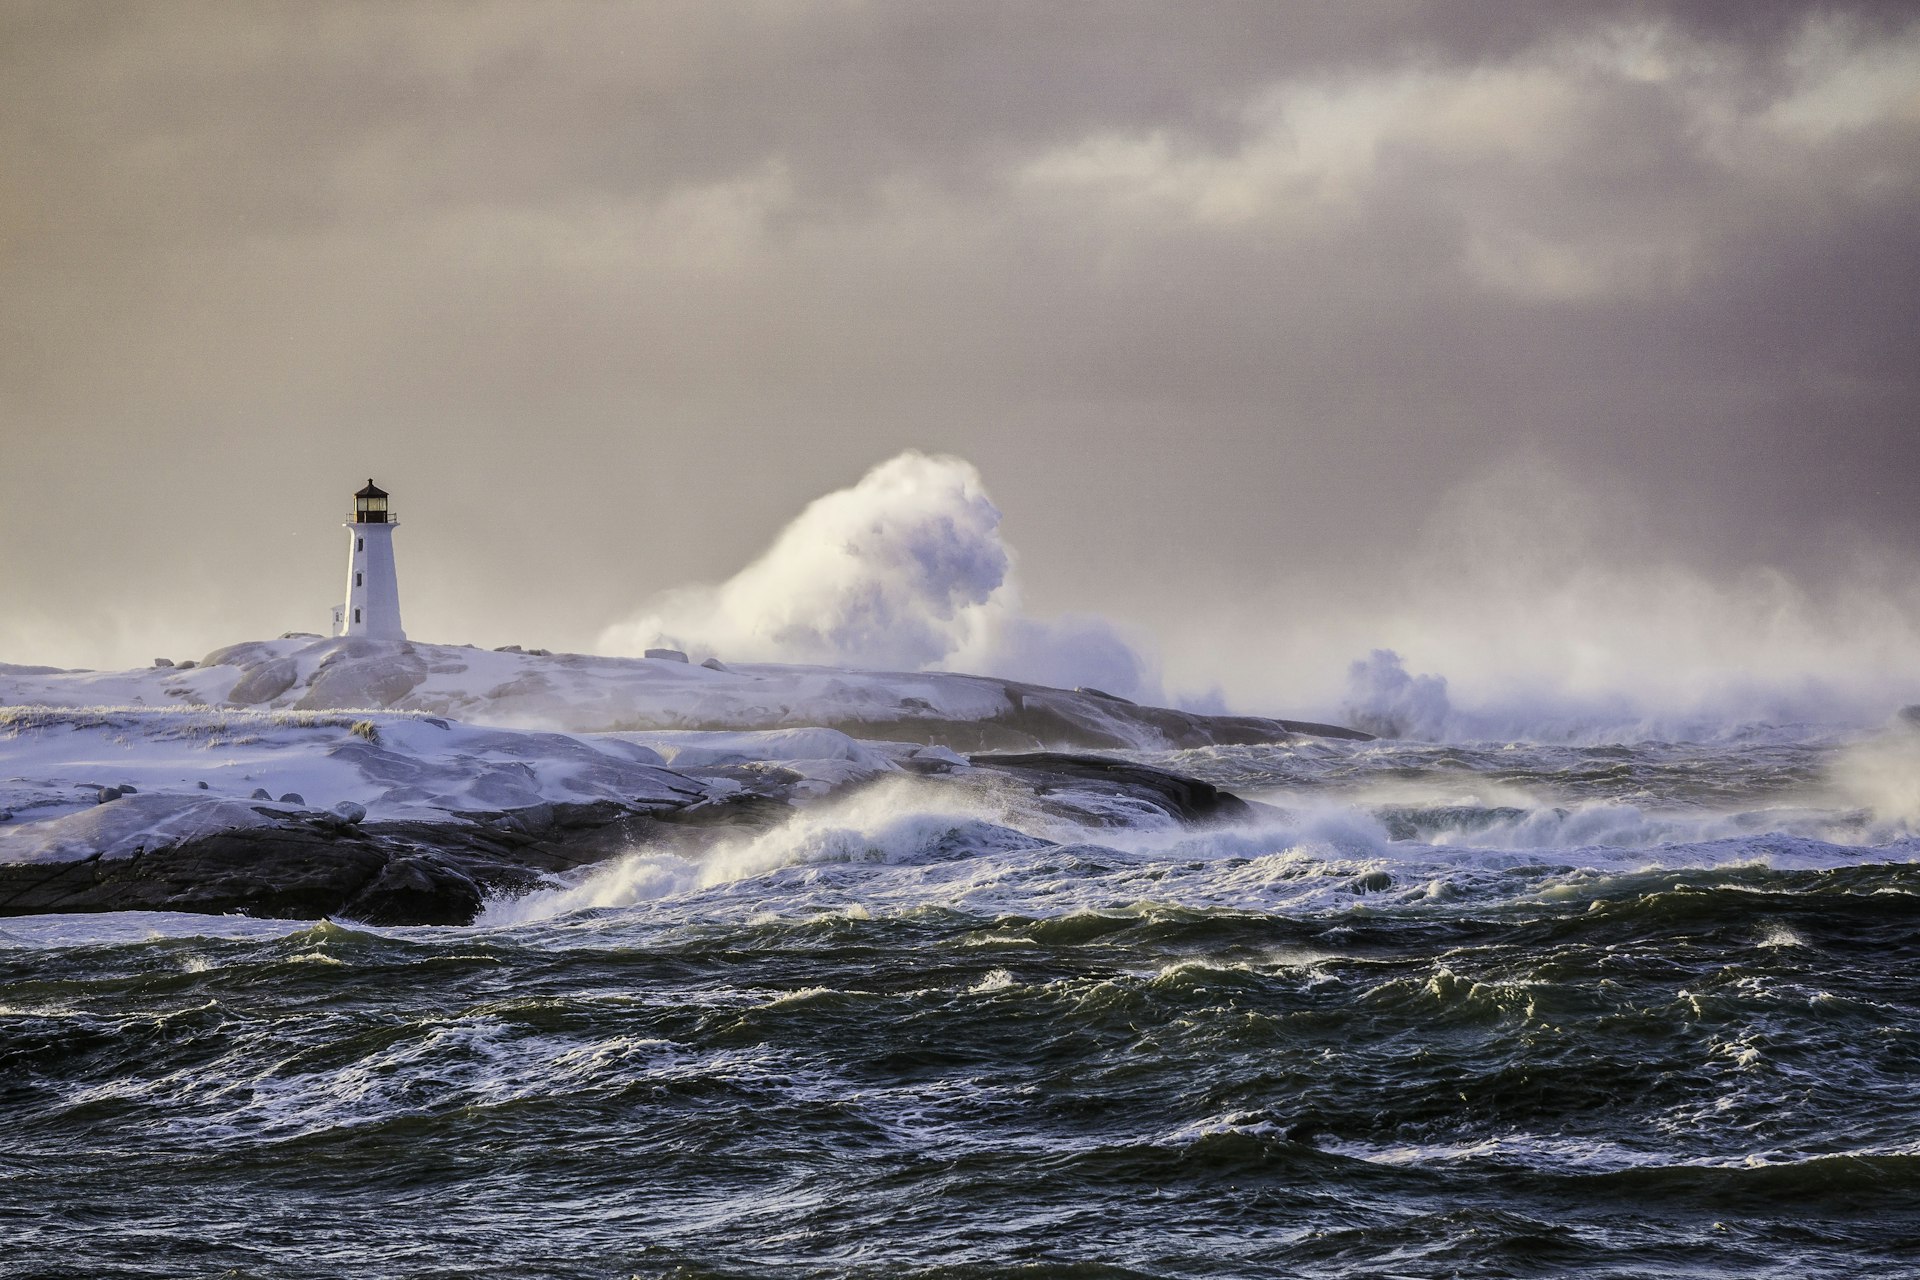 A lighthouse being buffetted by massive waves